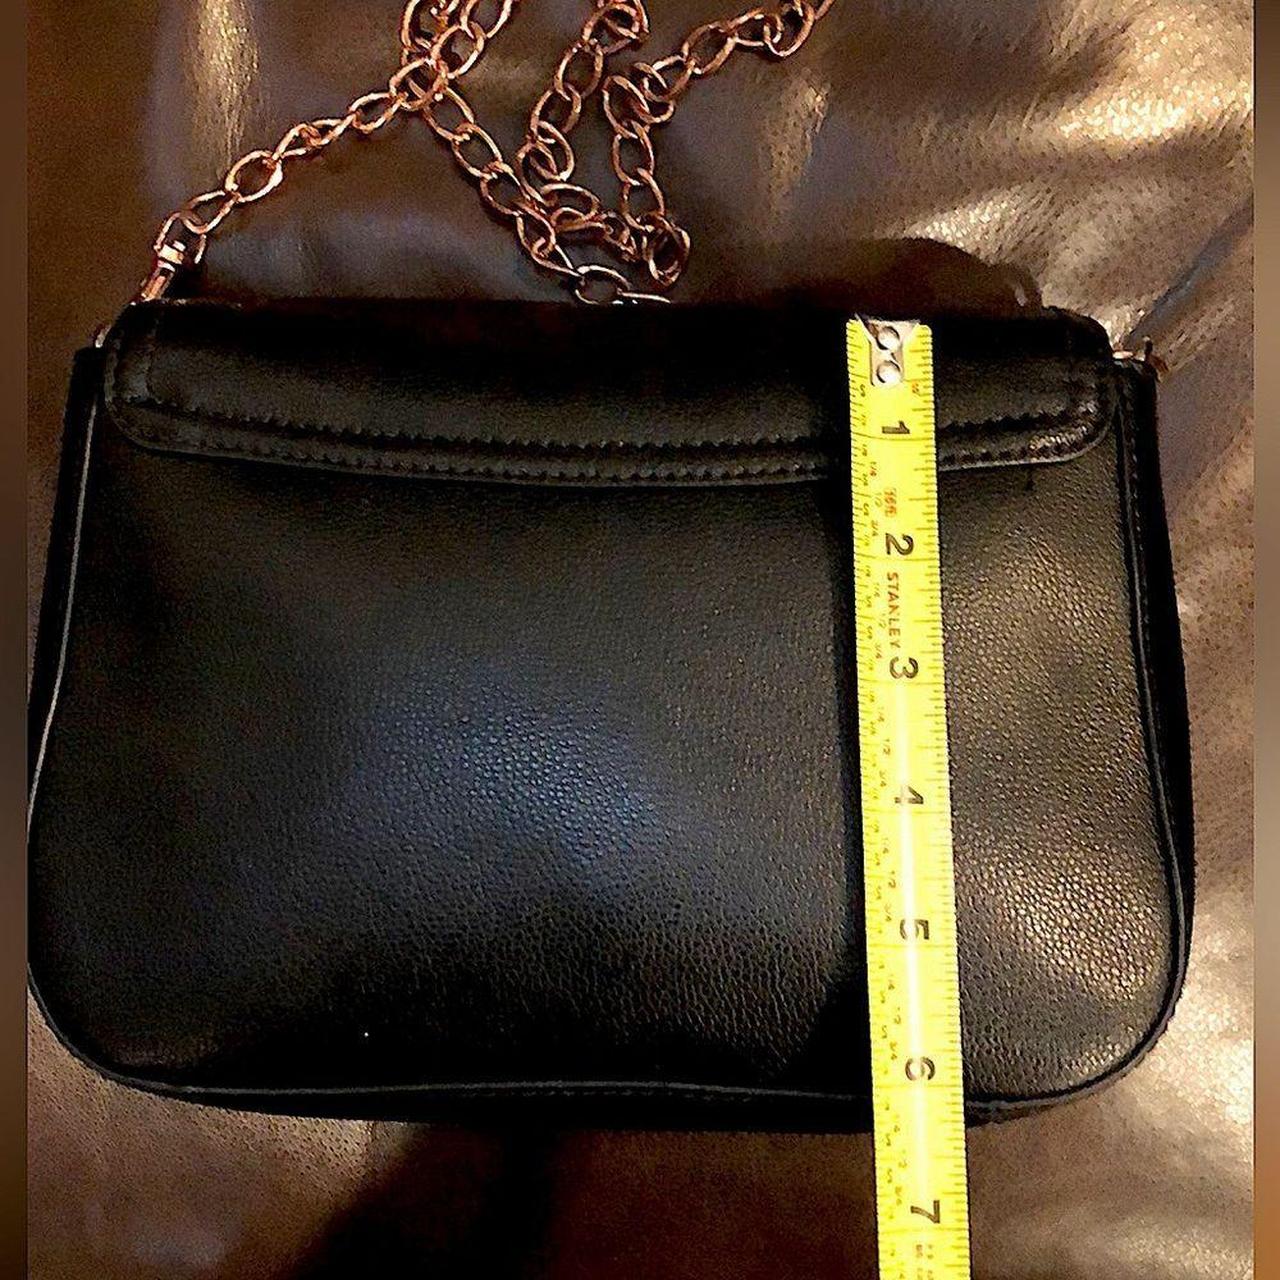 KATE SPADE Tumbled Black Leather Crossbody Shoulderbag with Rose Gold Chain